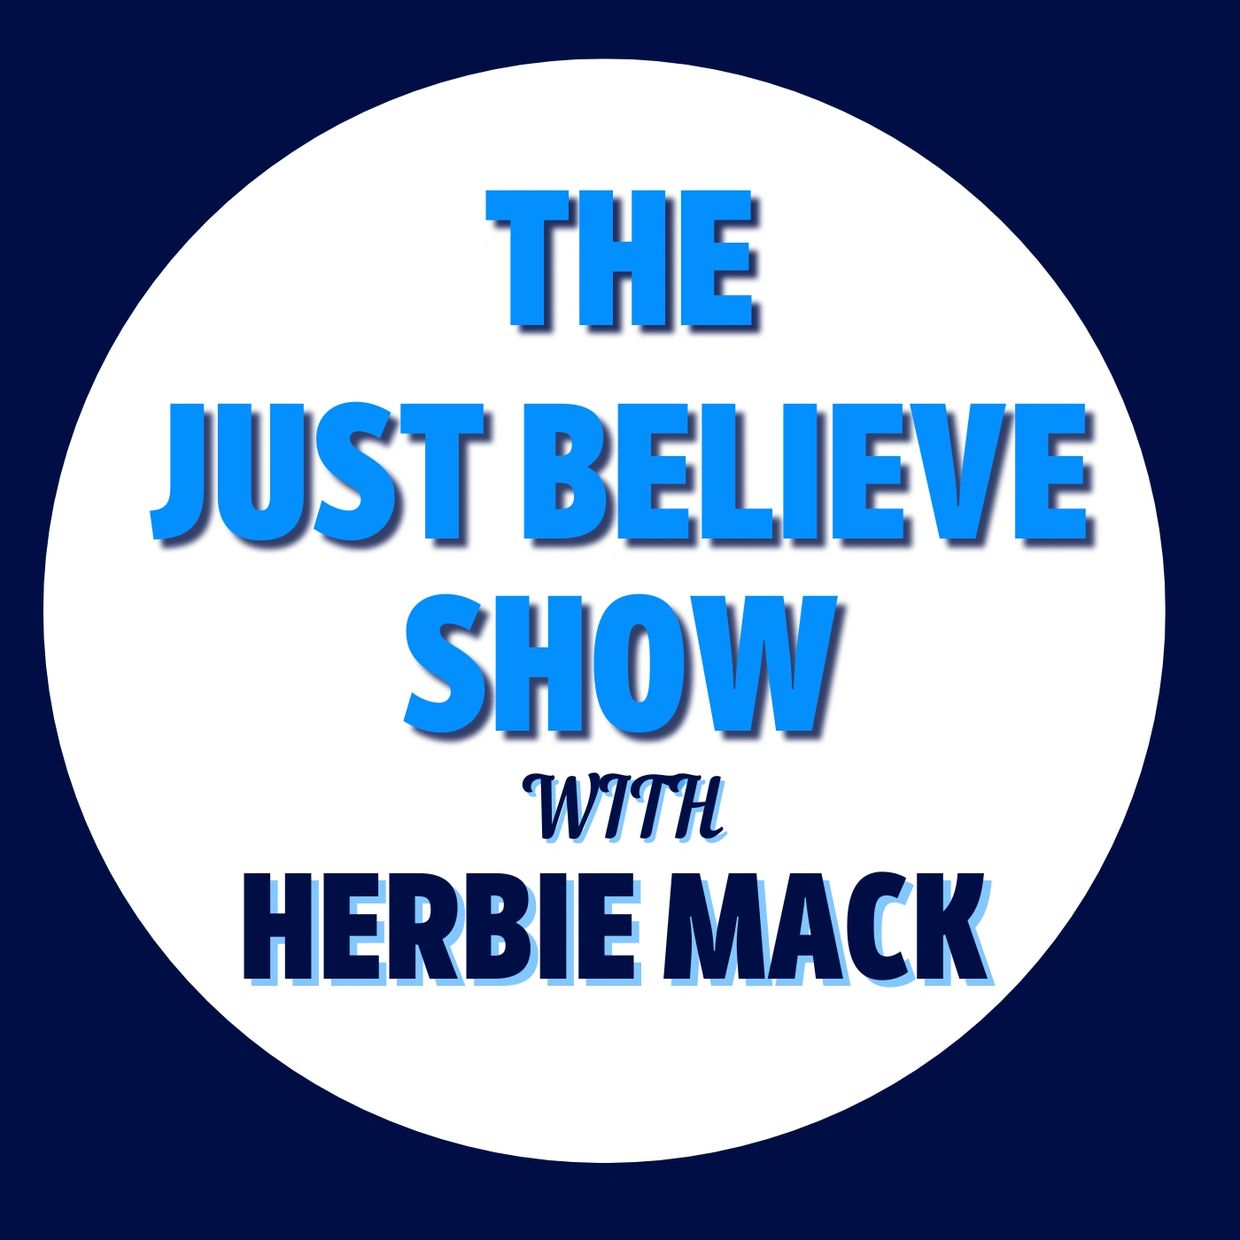 The Just Believe Show is a mental health podcast hosted by Herbie Mack. 